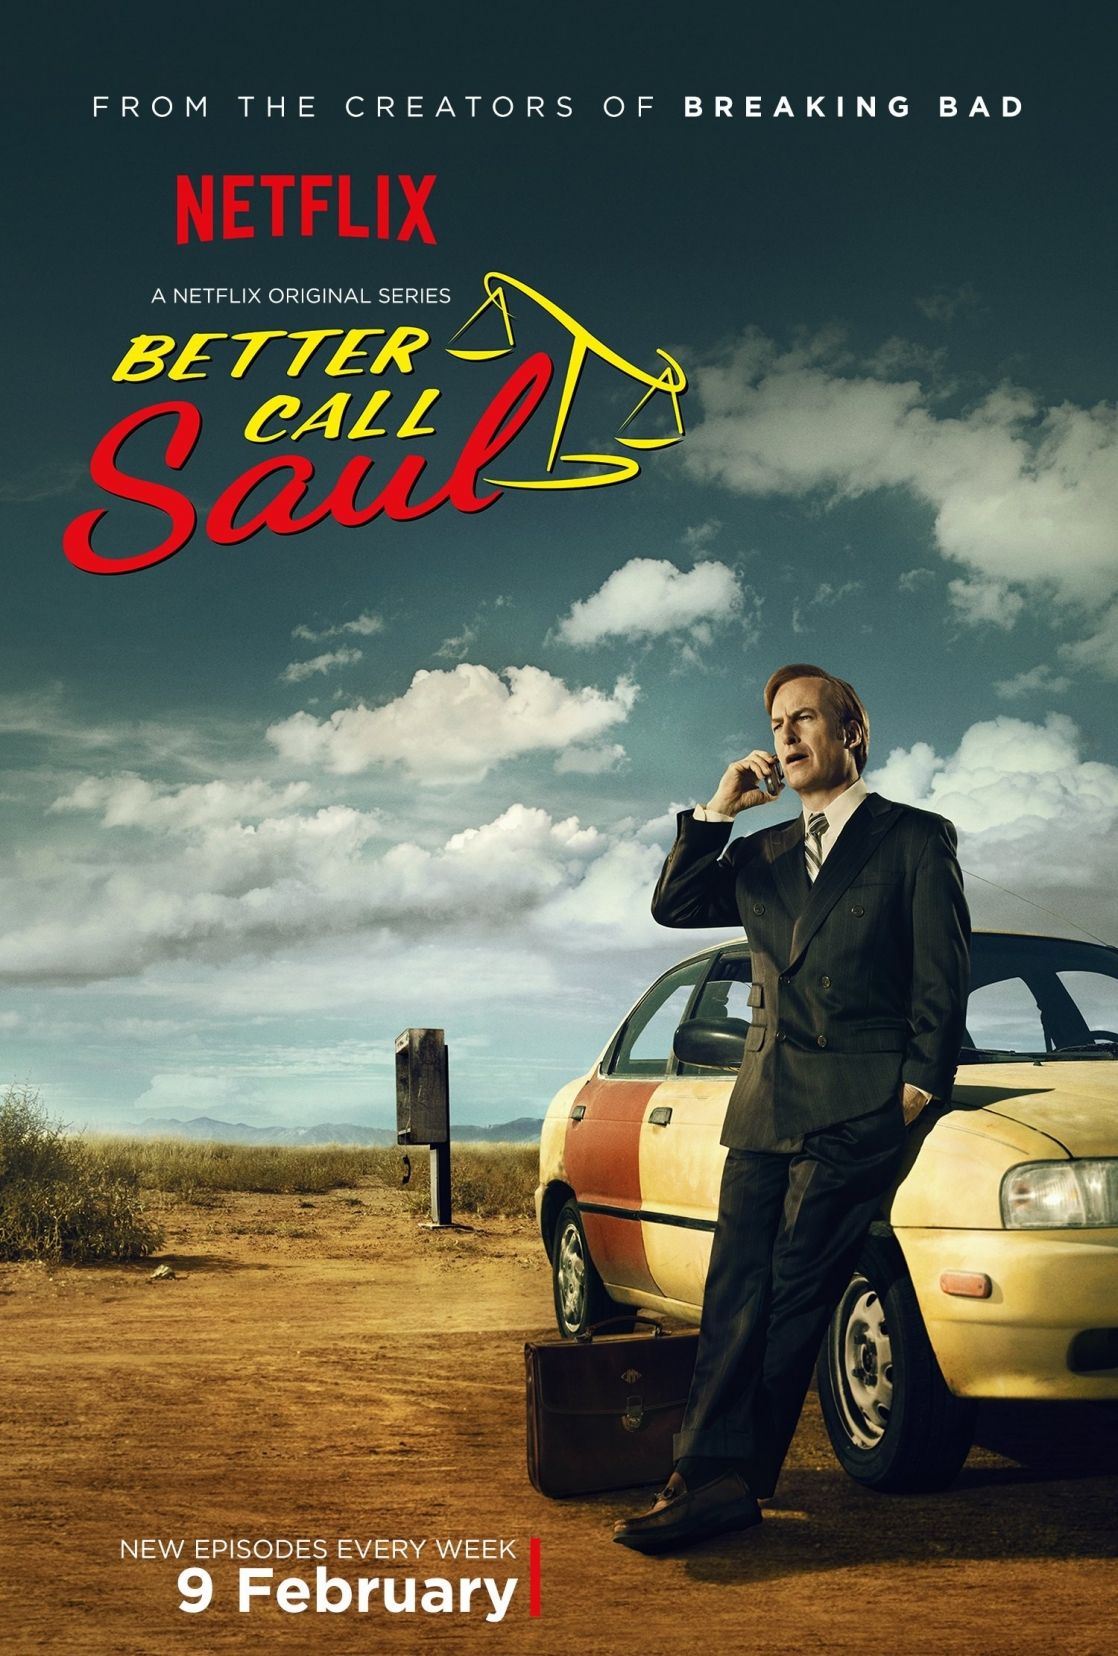 Better Call Saul Background. Xbox